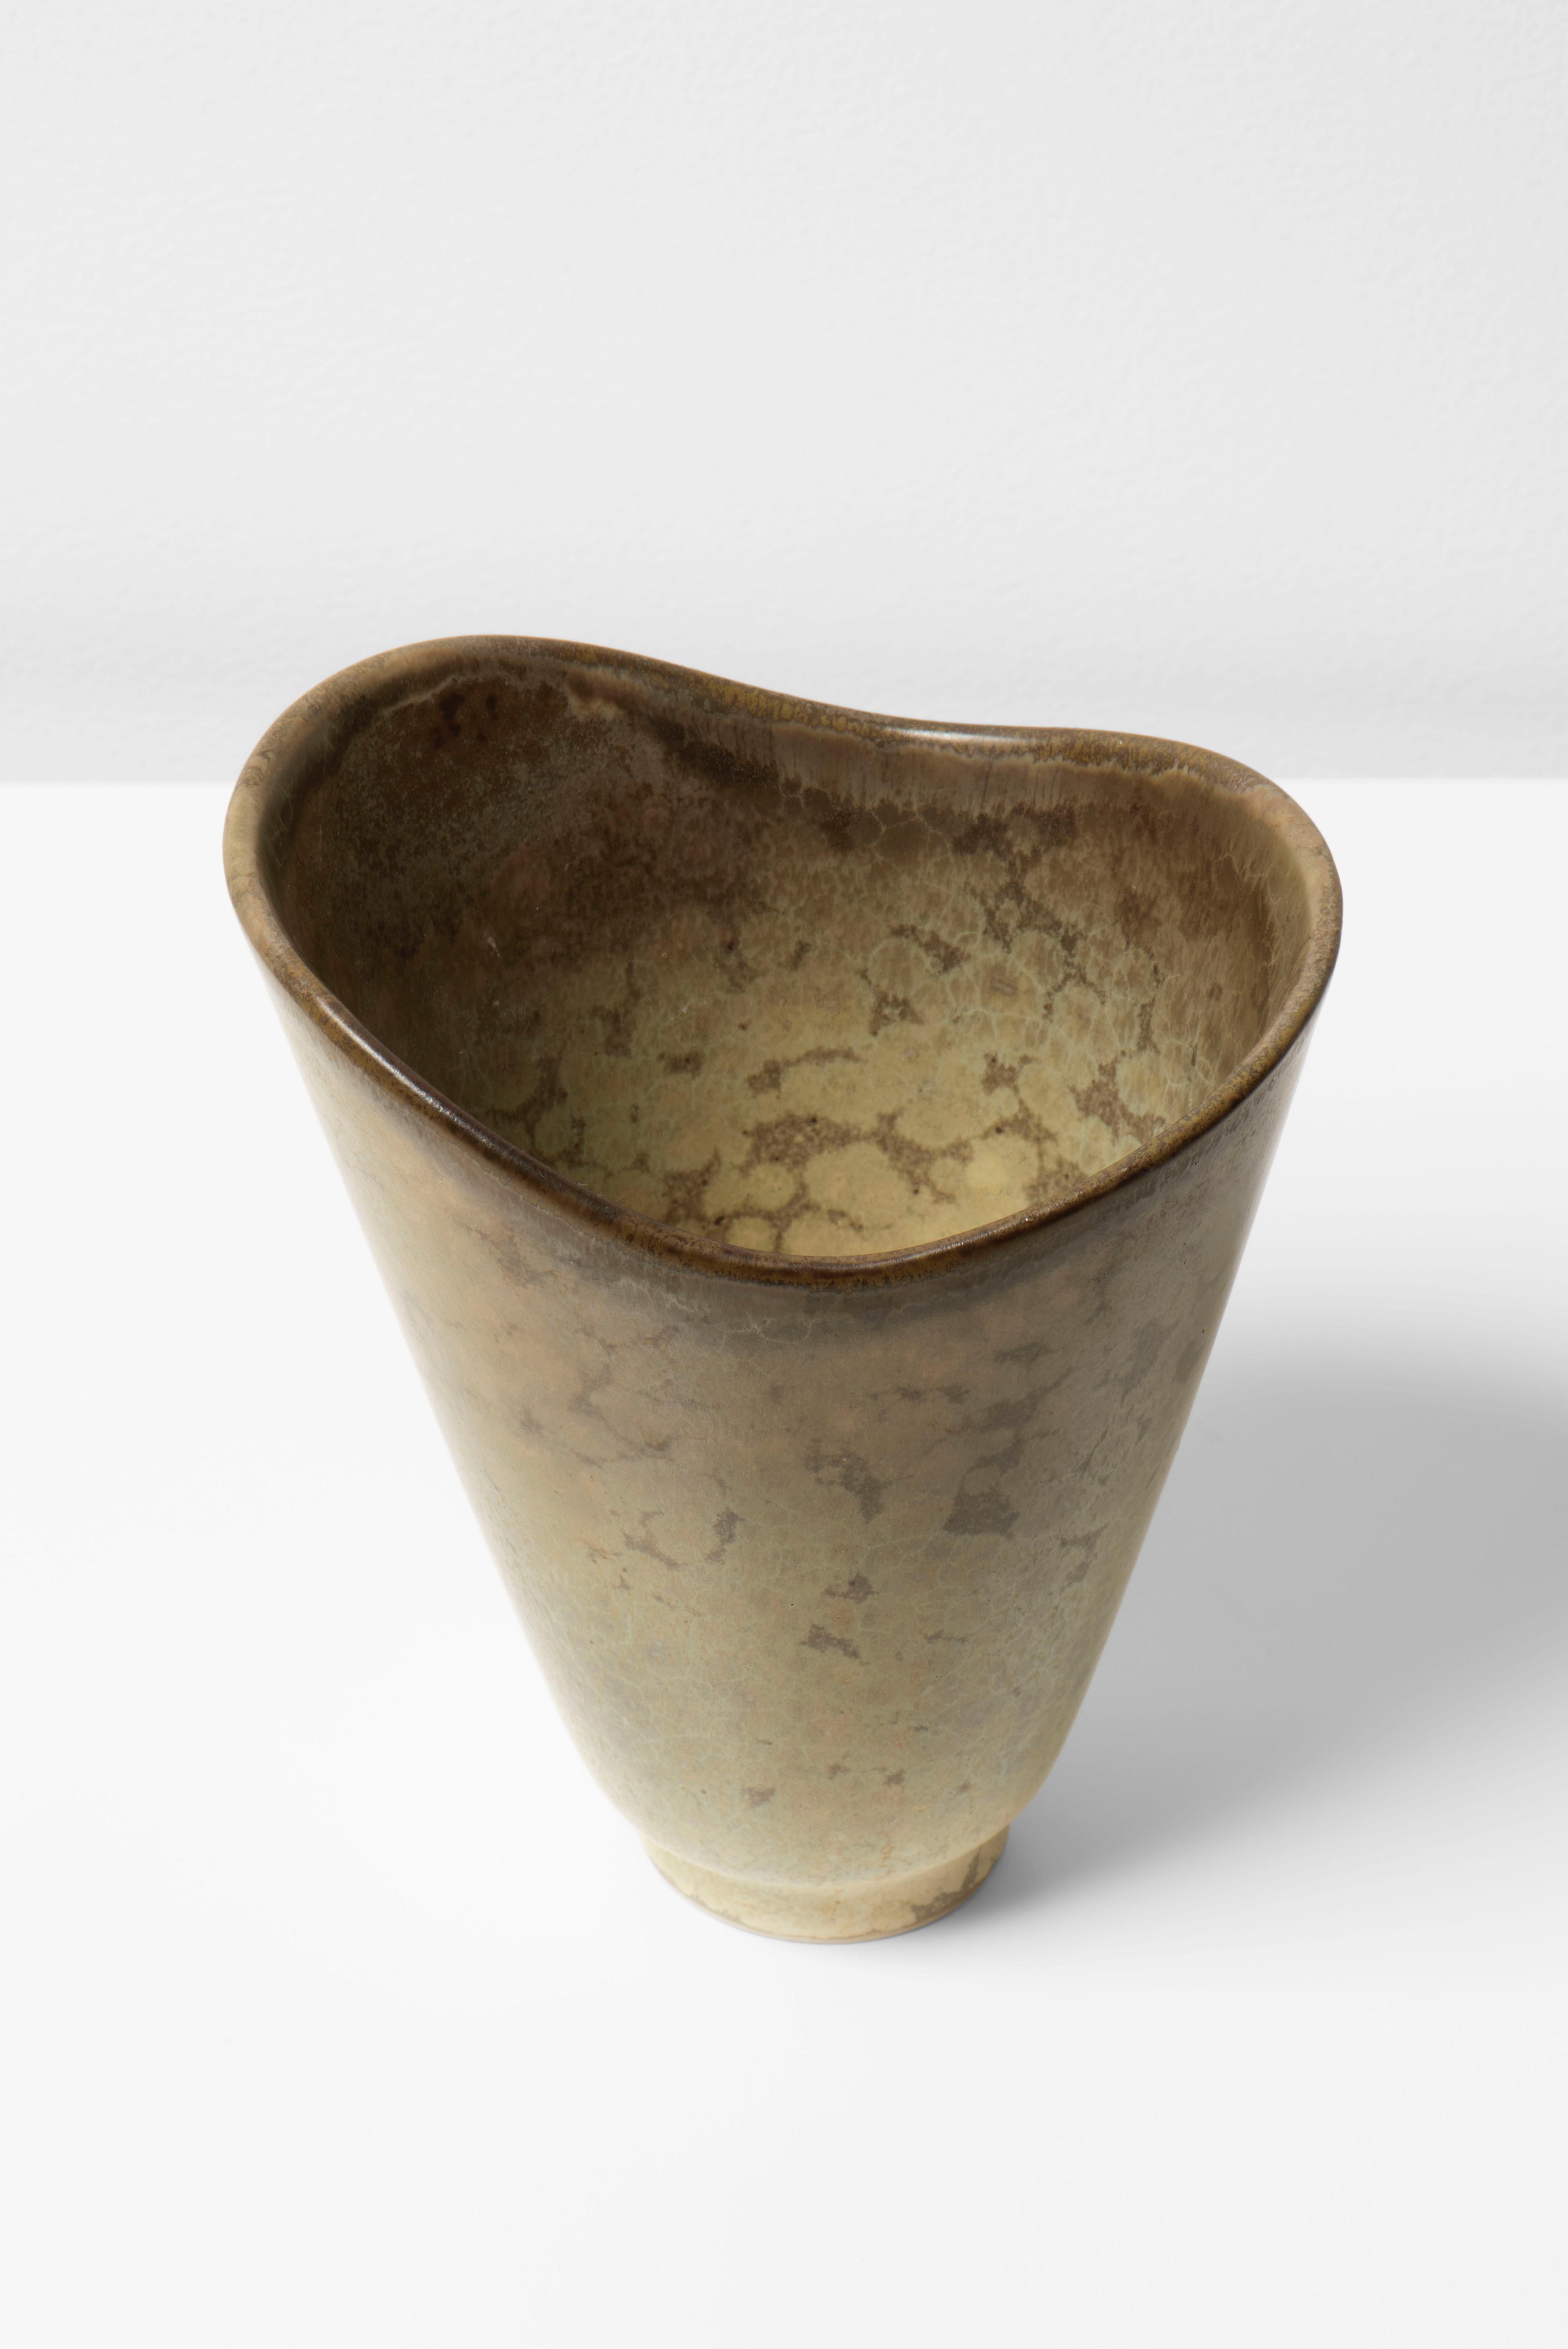 Carl Harry Stålhane was a renowned Swedish ceramicist, born in 1920. He is best known for his remarkable work in the field of ceramics.

Stålhane developed a distinctive style that combined clean, modern shapes with organic glazes and abstract